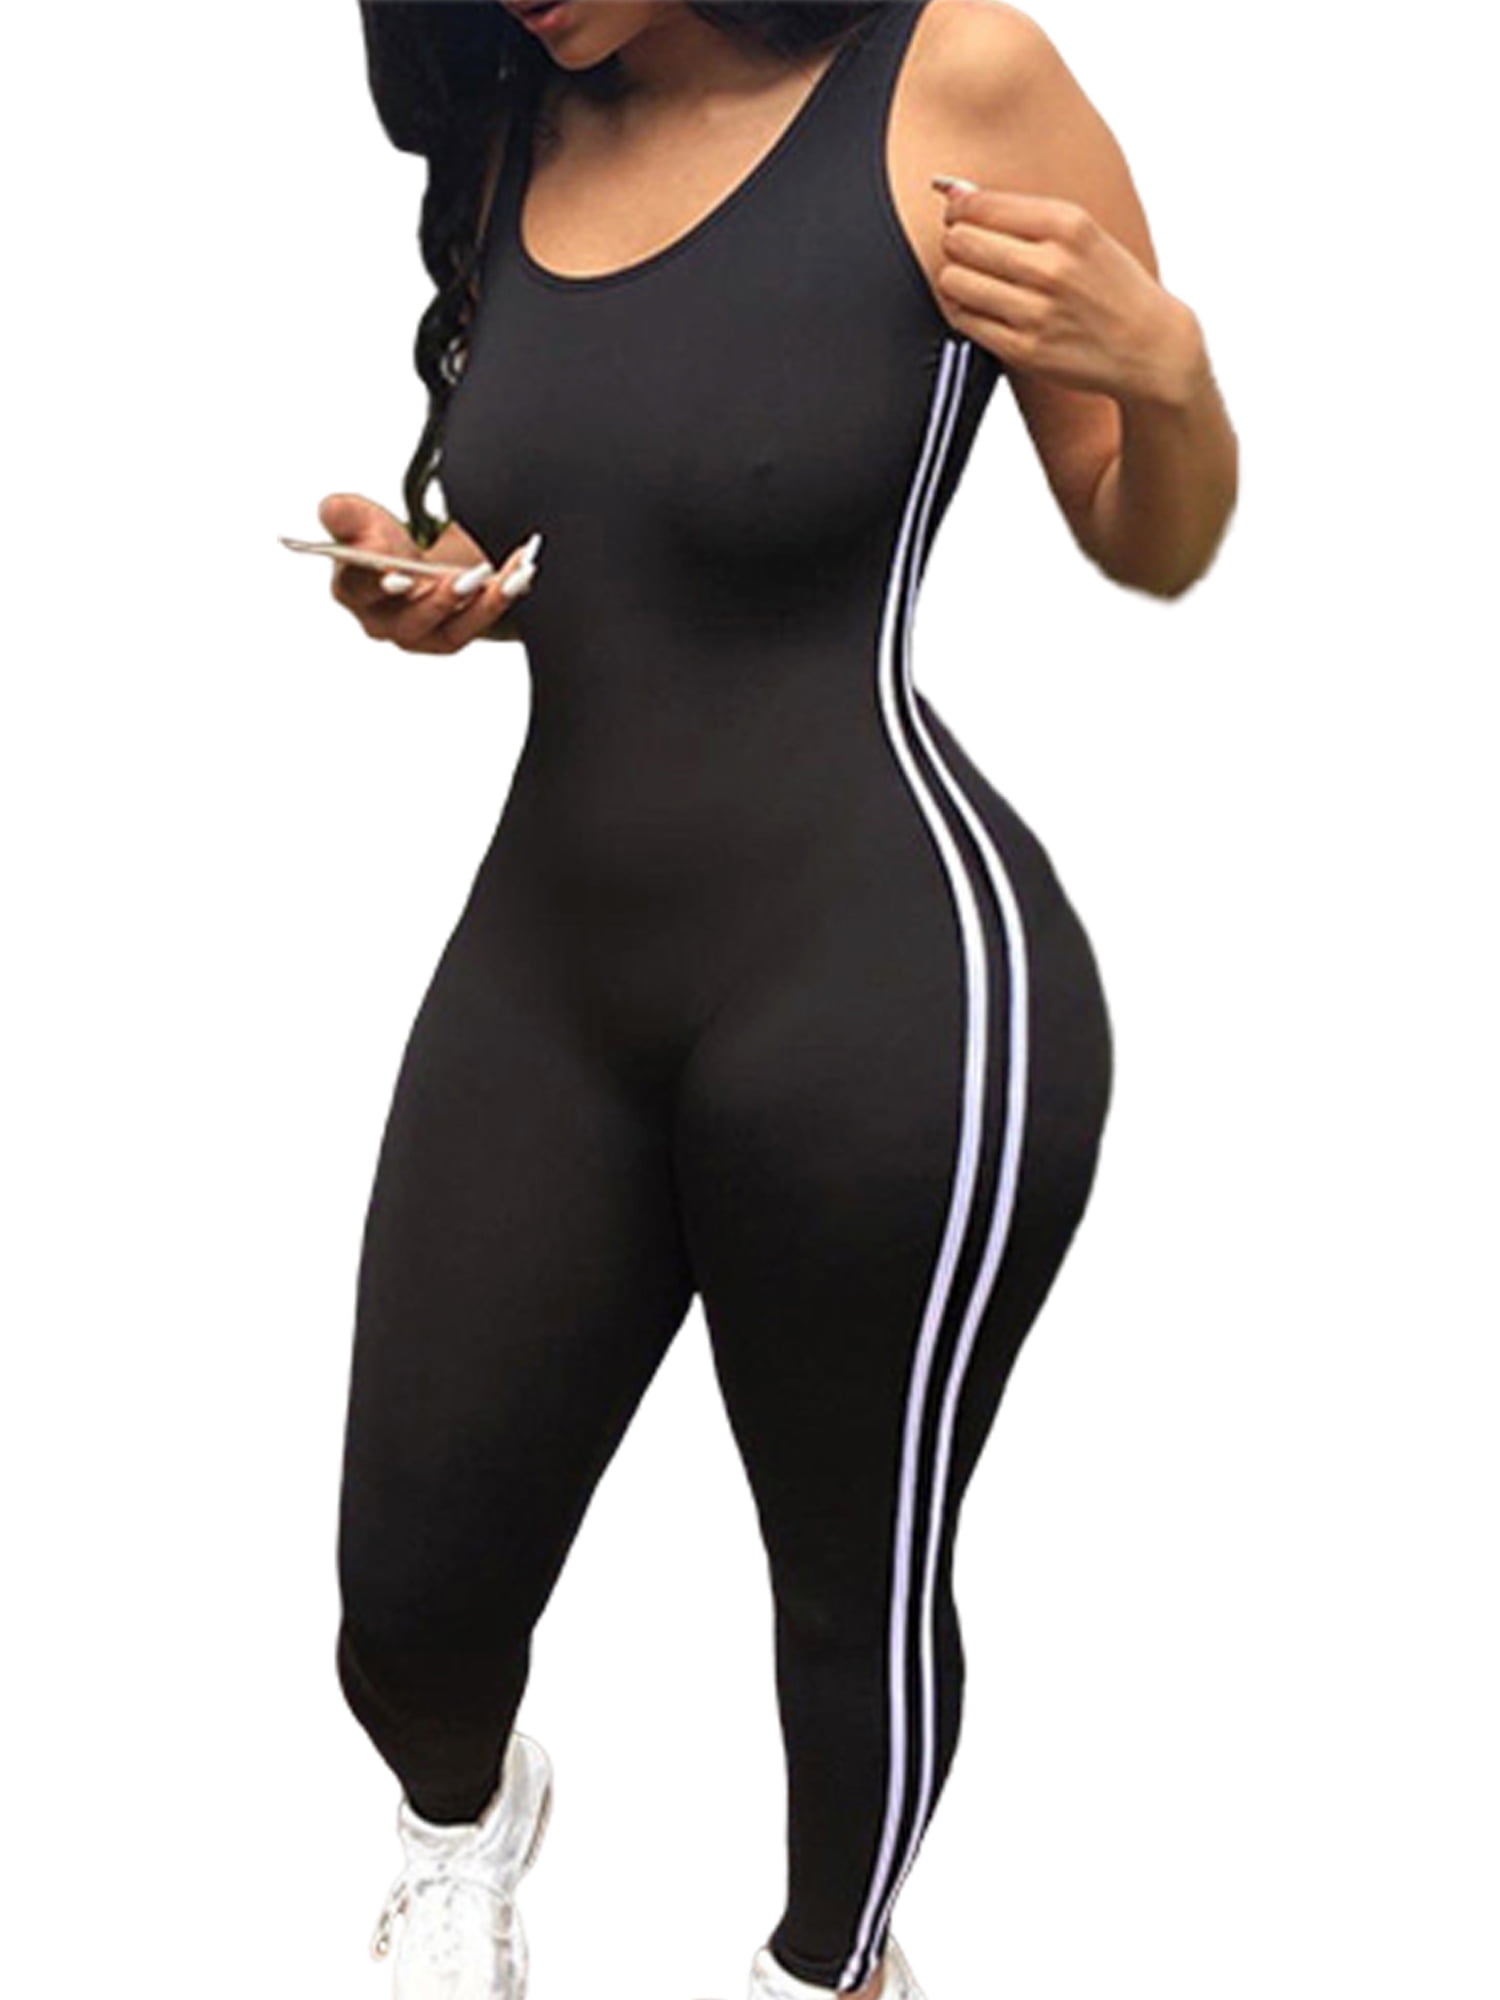 Comaba Women Bodycon Long Sleeve Yoga Sports Shorts Romper Playsuit